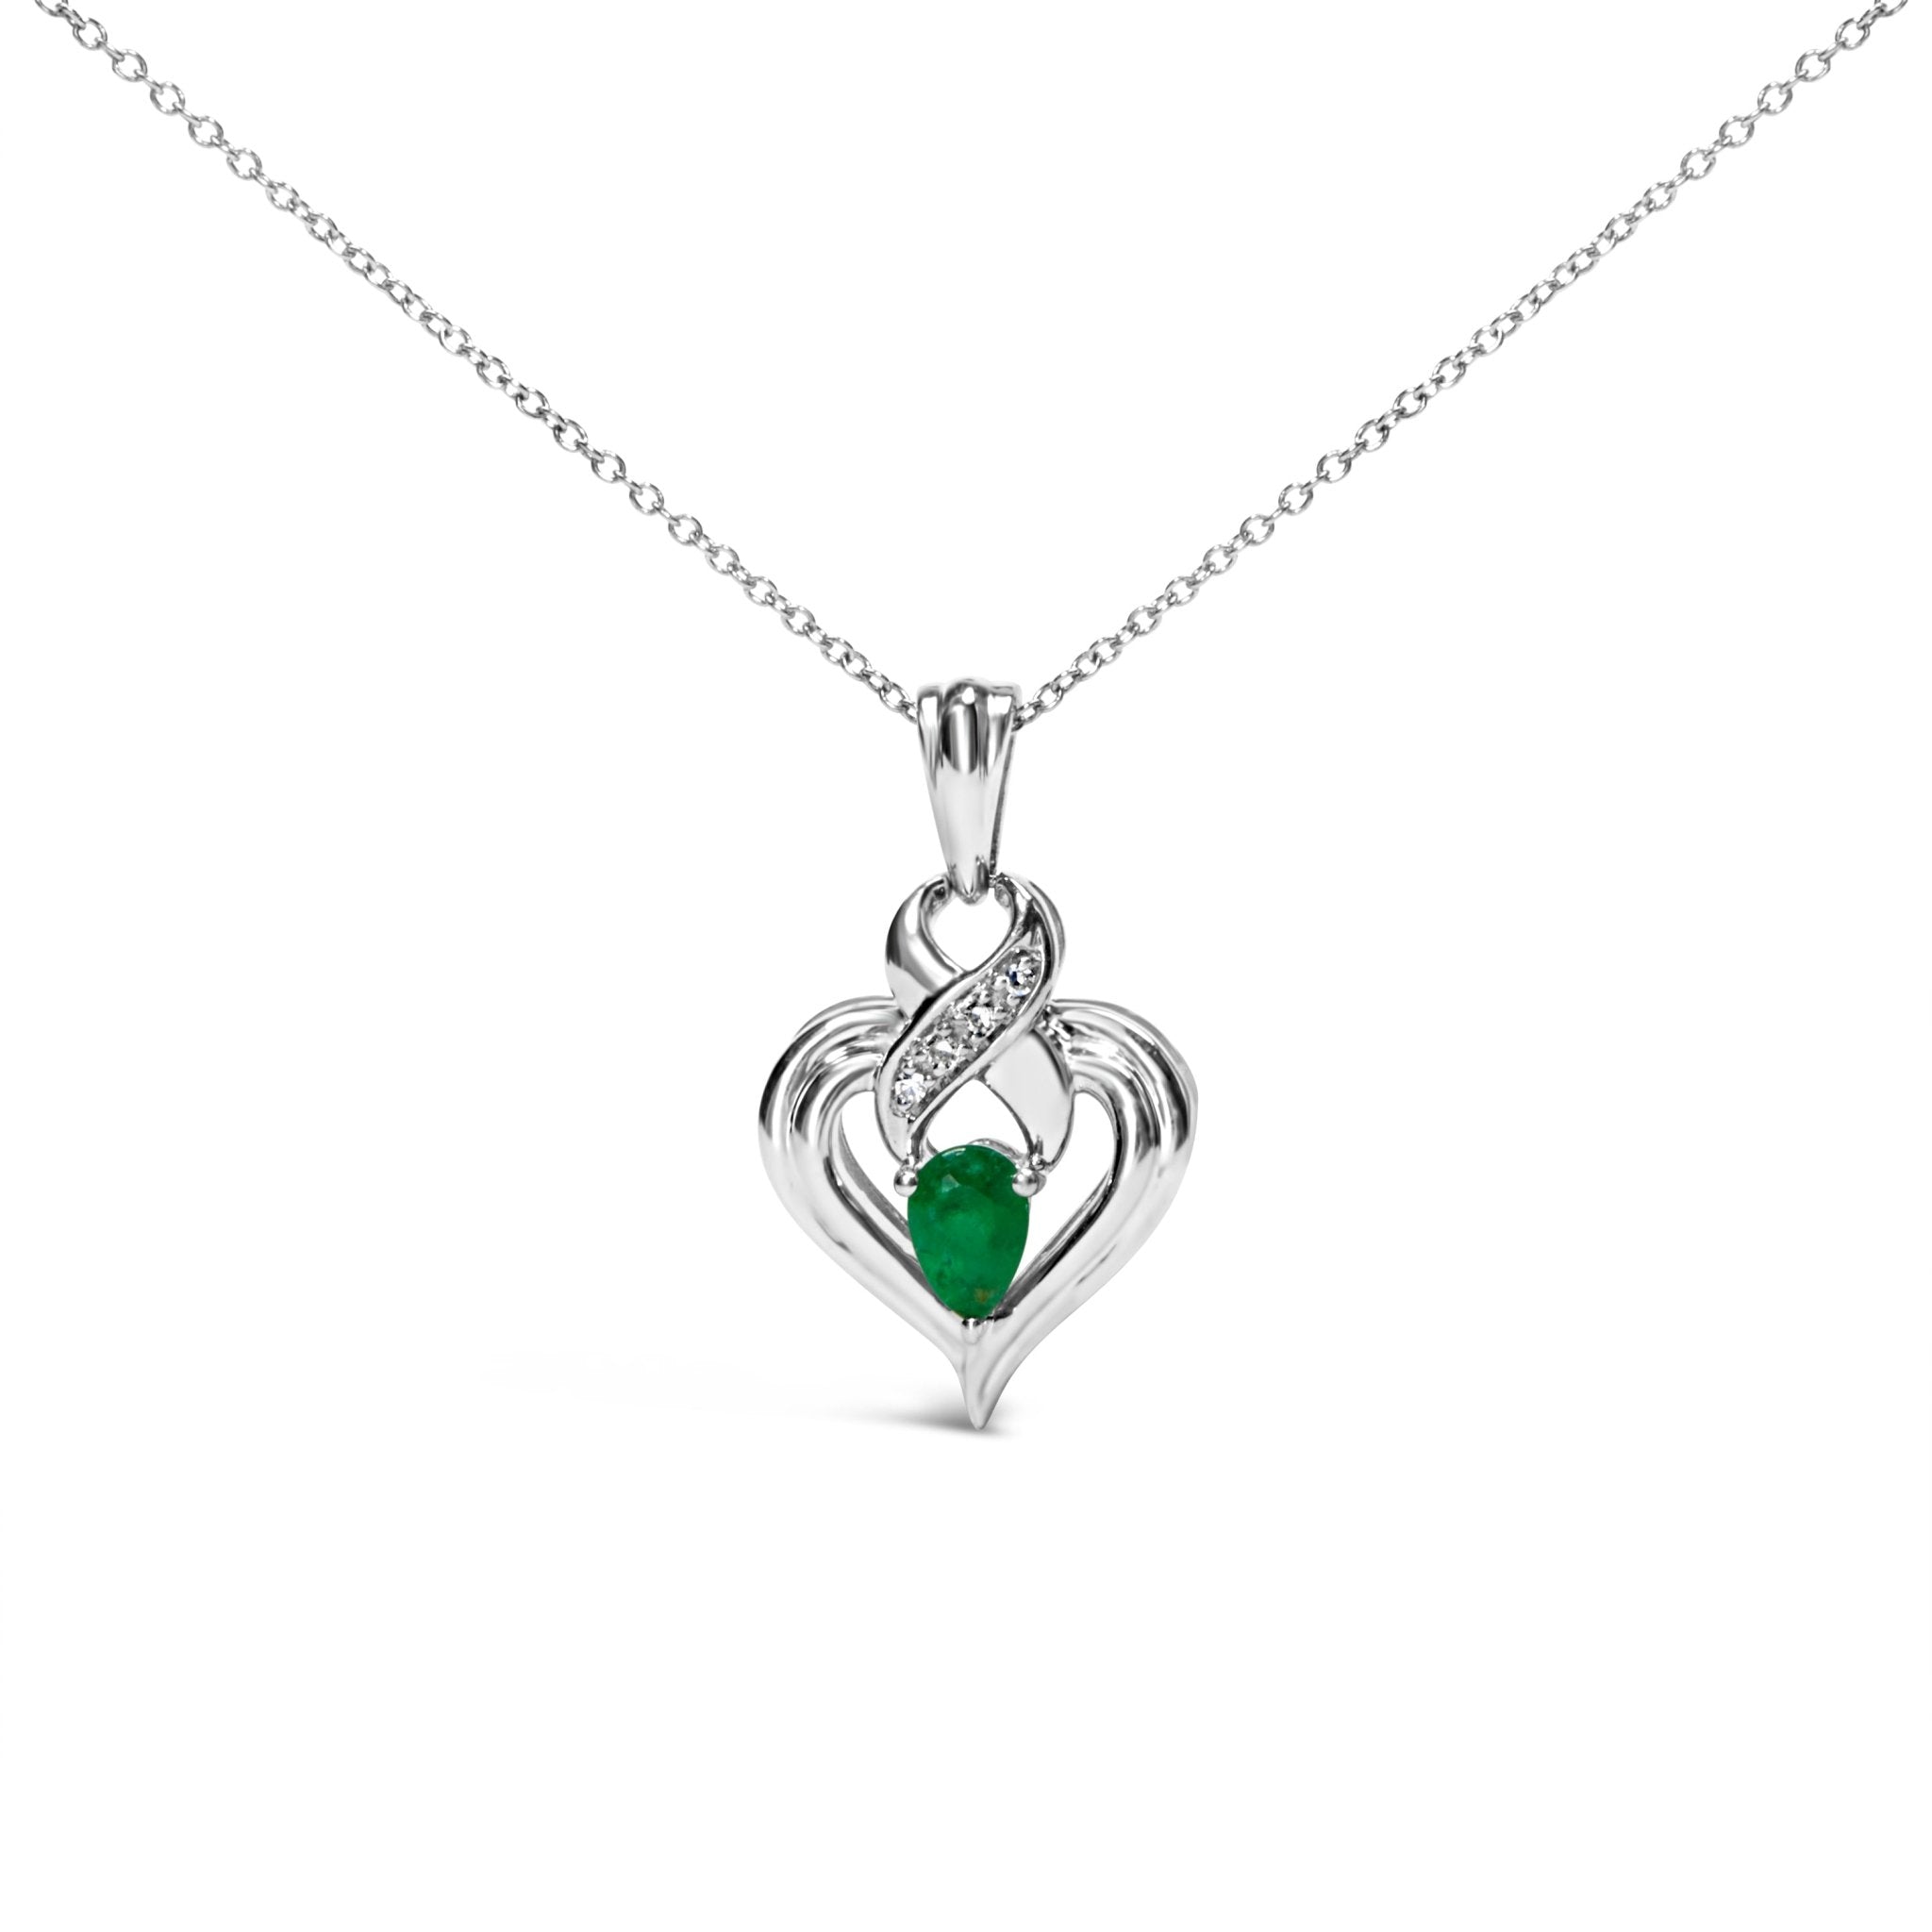 .925-Sterling-Silver-6x4mm-Pear-Emerald-and-Diamond-Accent-Heart-Pendant-Necklace-(H-I-Color,-SI1-SI2-Clarity)-18-Inches-Pendants-&-Charms